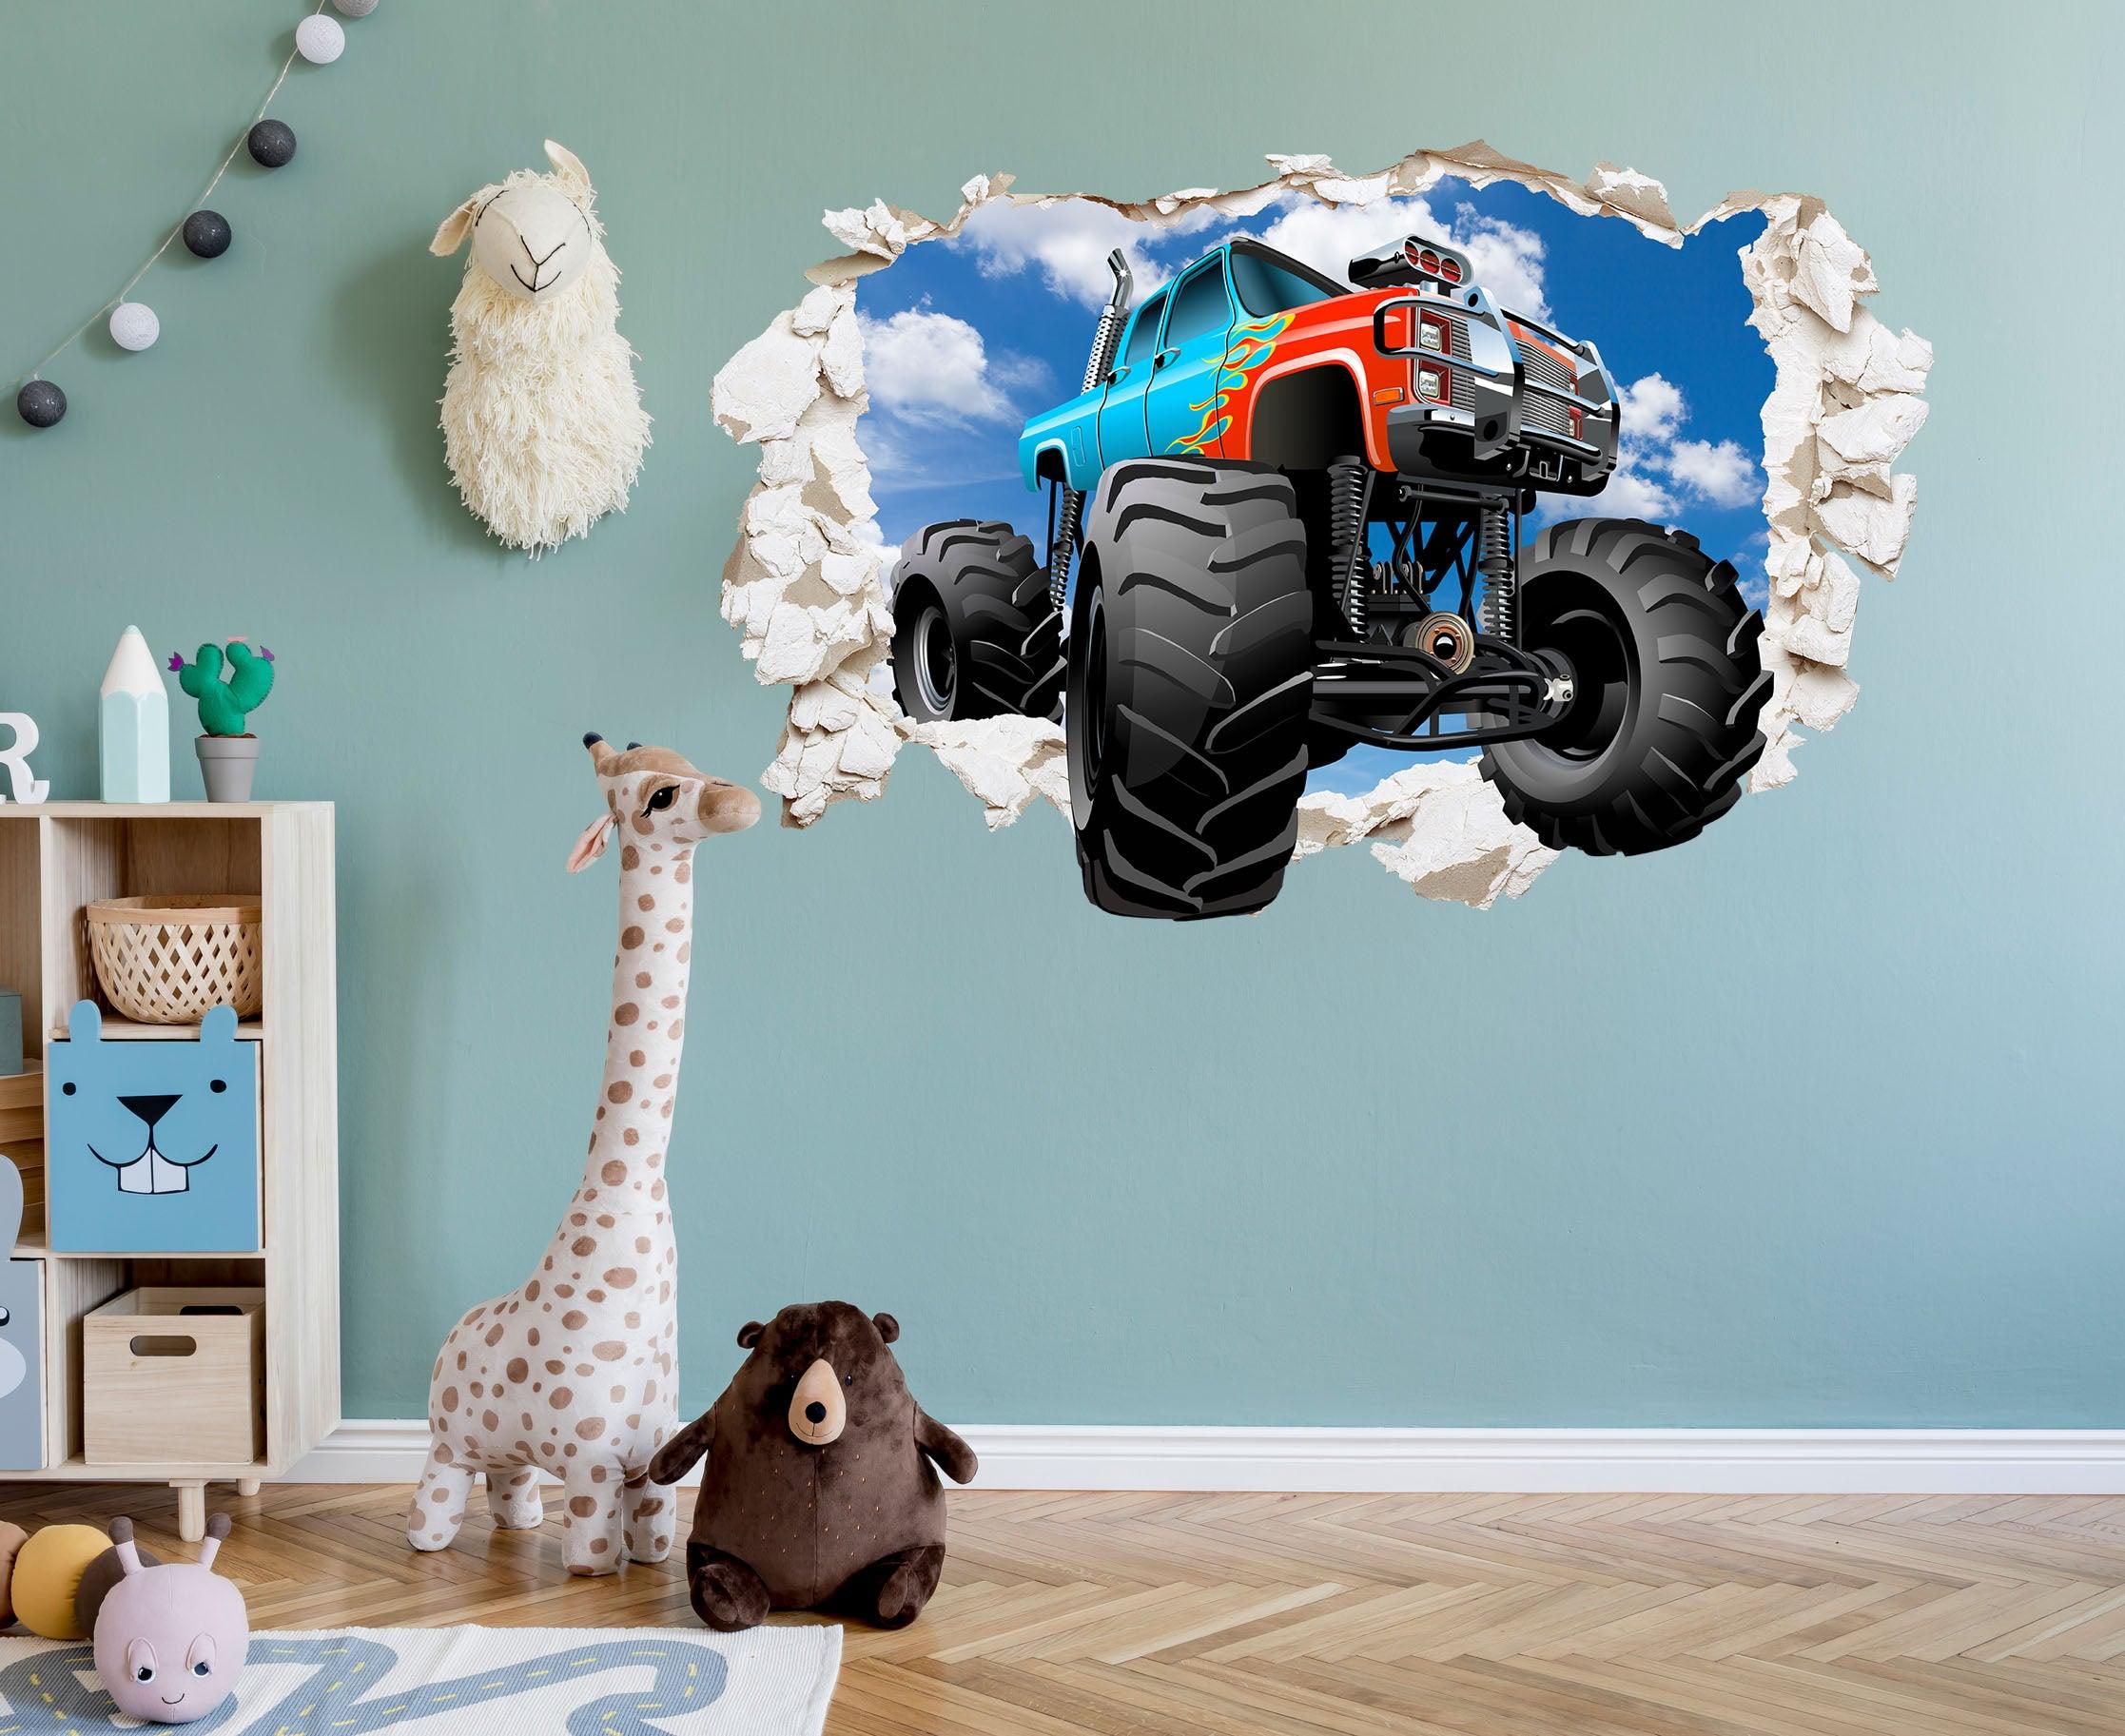 3D Monster Truck Plaster Wall, Wall Decal Sticker, Removable 107